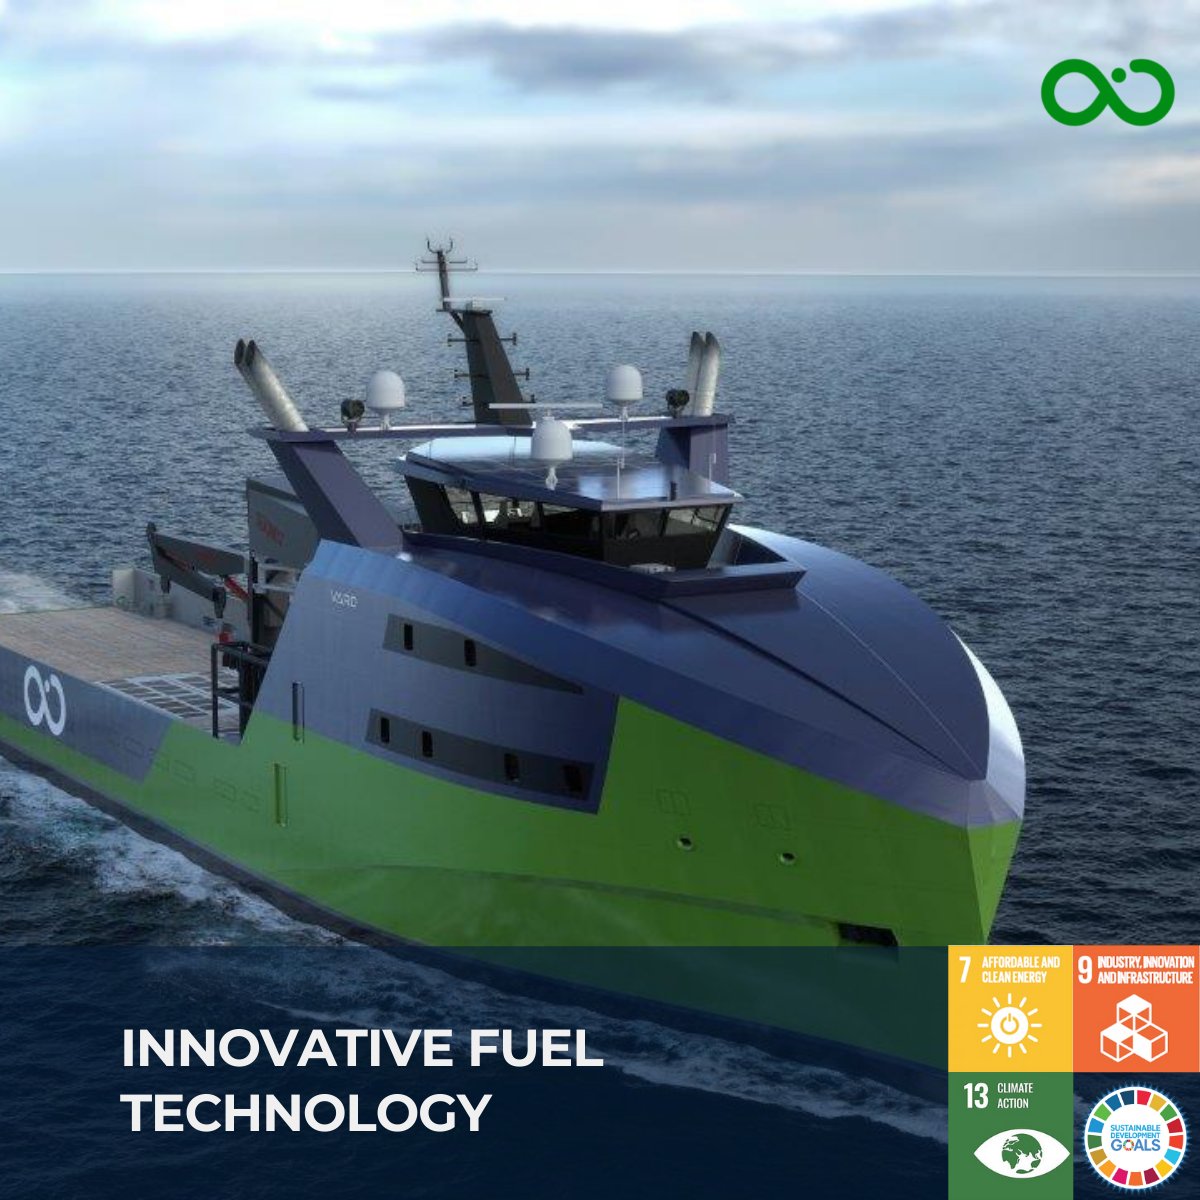 With funding from @transportgovuk we are developing a zero emission marine propulsion system as a greener and cleaner replacement for traditional fuel. We're proudly showcasing this project today at @COP26 as just one example of our work to transform operations at sea.